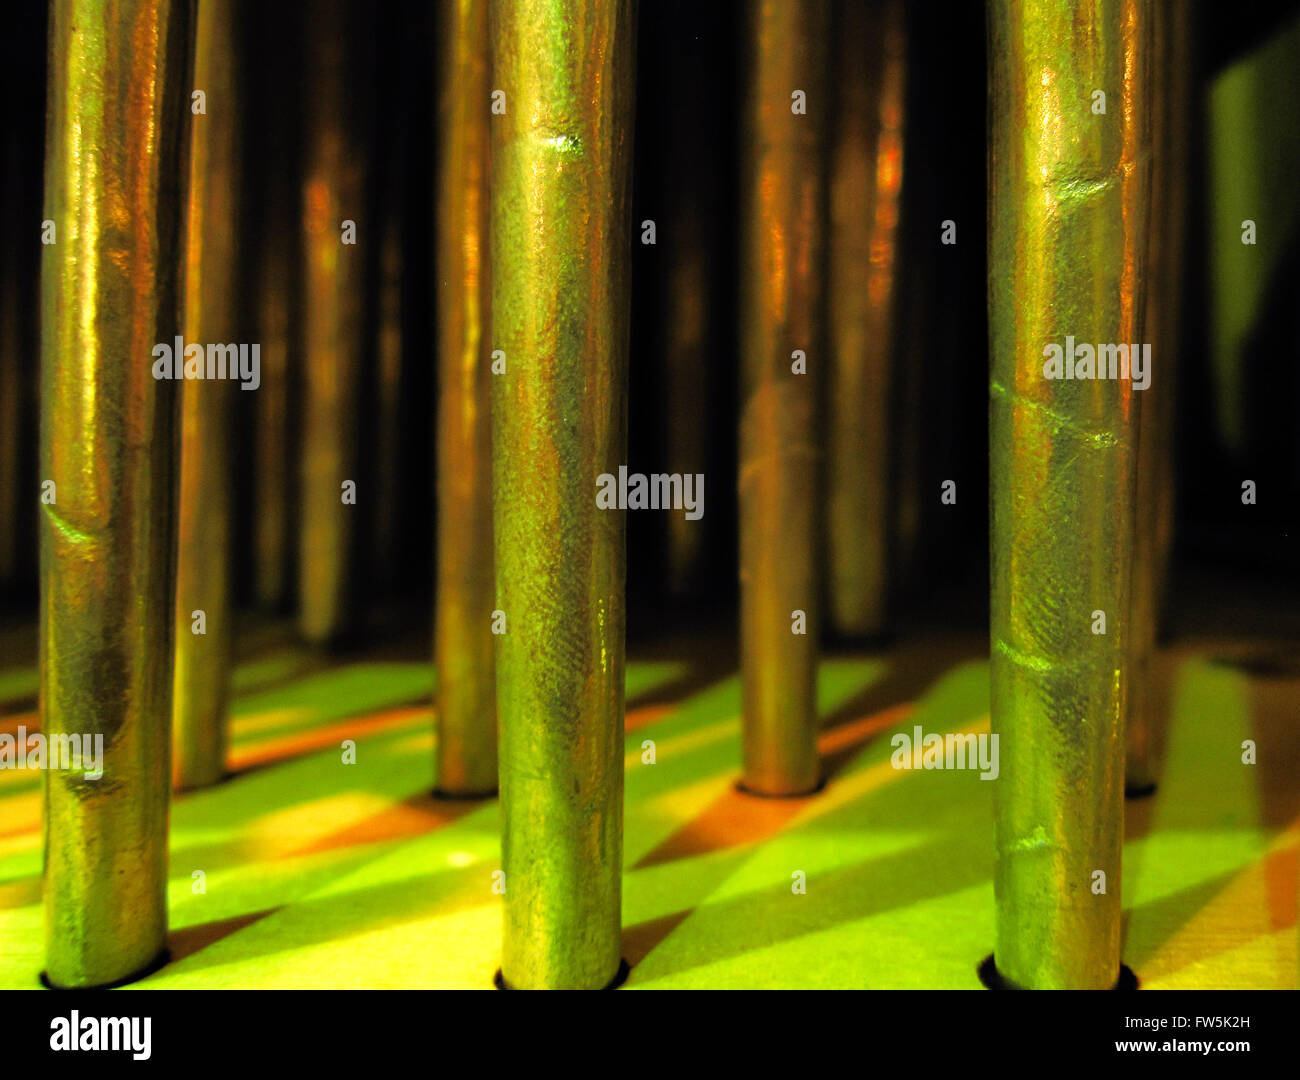 close-up of small metal organ pipes, in stage lighting, from inside a chamber organ by Peter Collins Ltd.; this type of concert platform organ is used especially for continuo playing in Baroque orchestras. Stock Photo